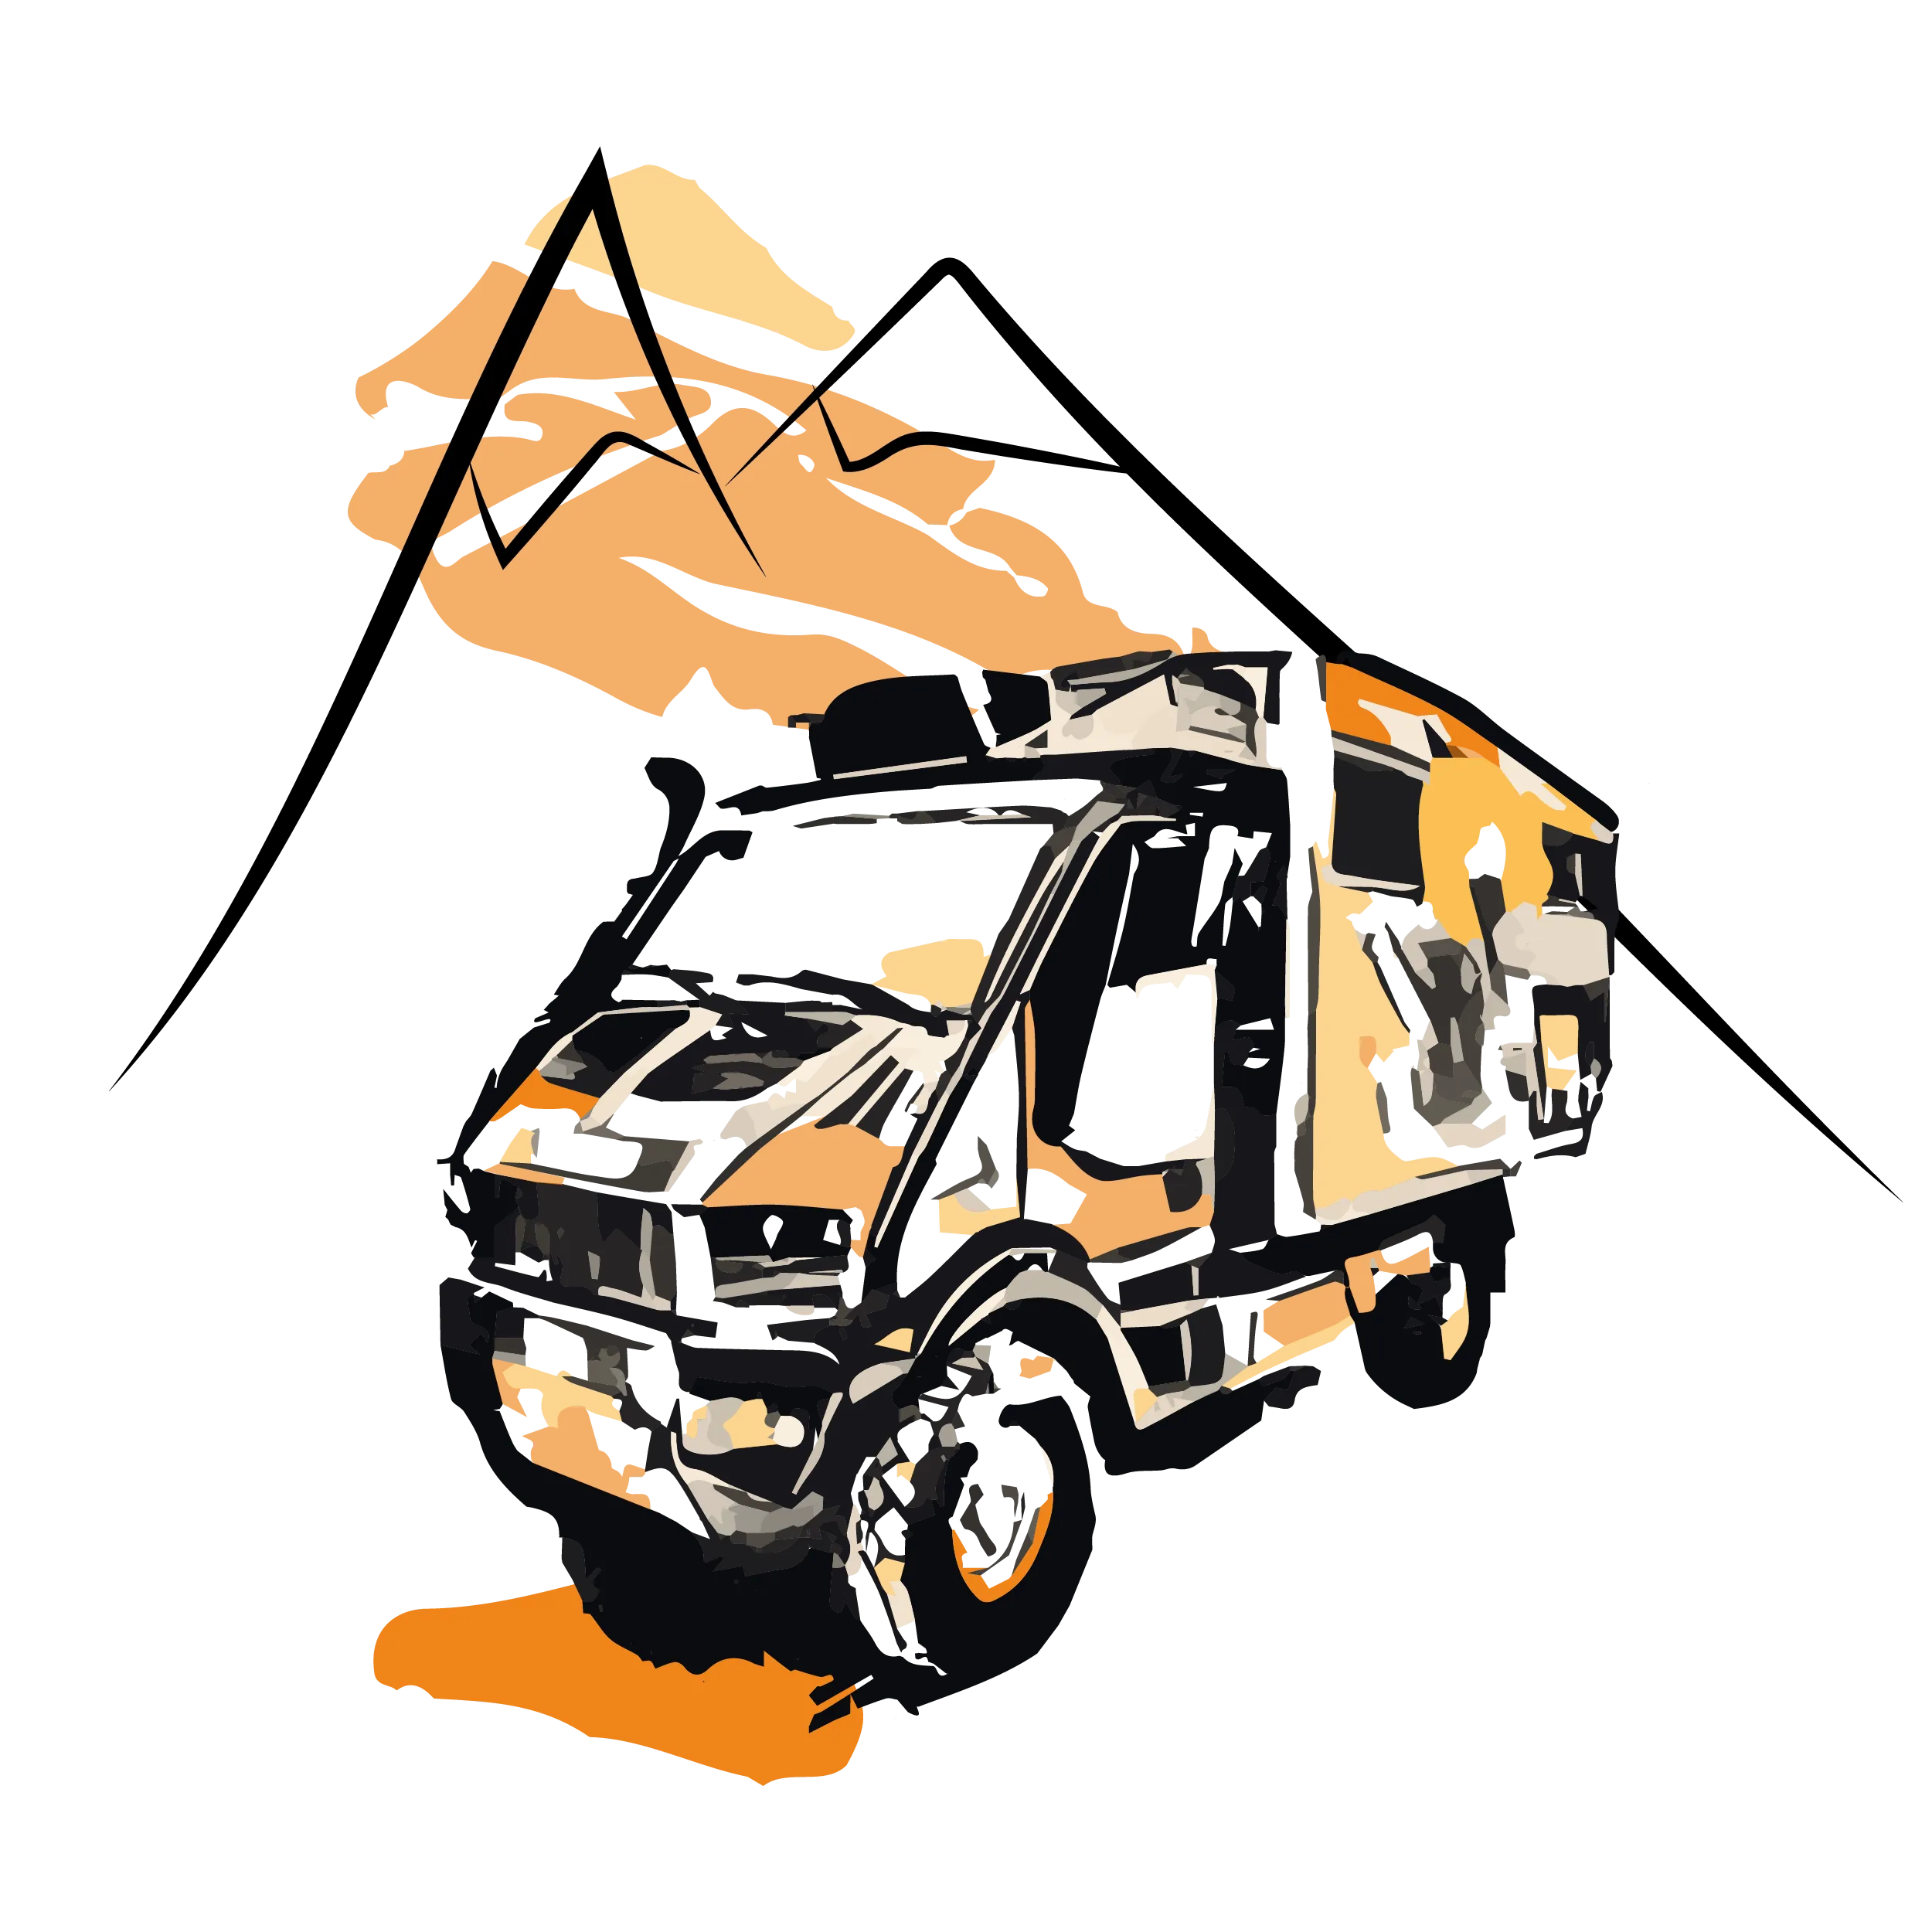 Truck with a mountain background